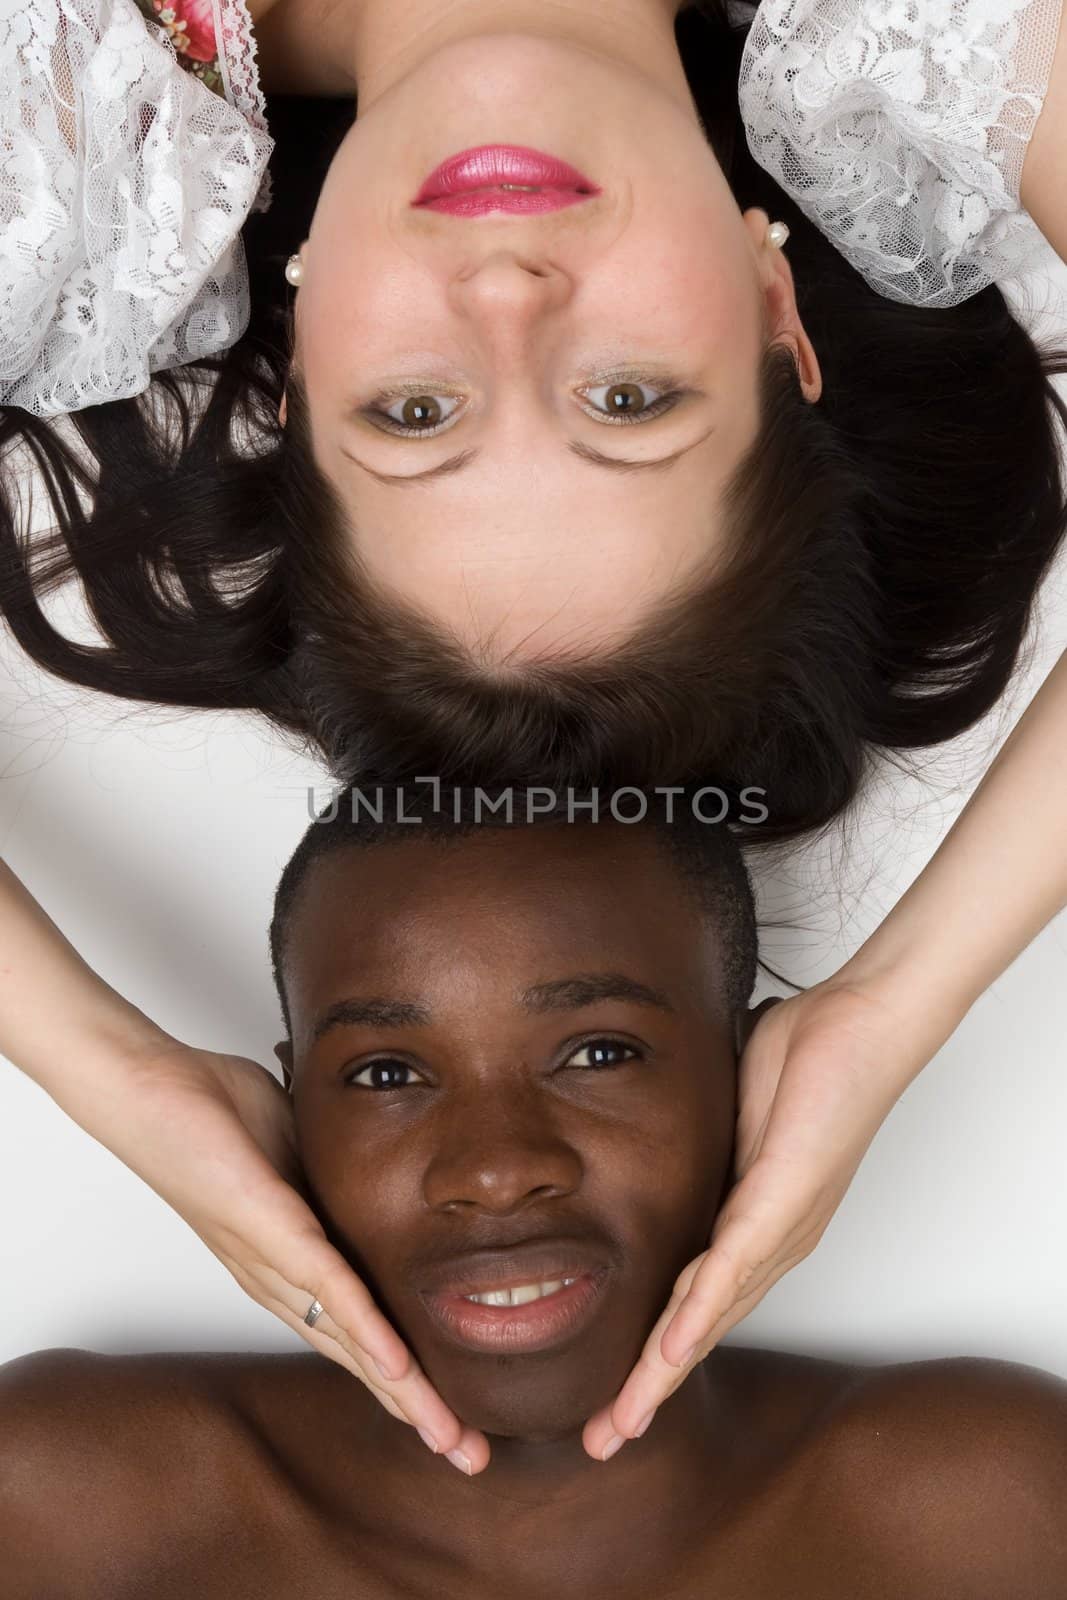 Black man and white woman by stepanov